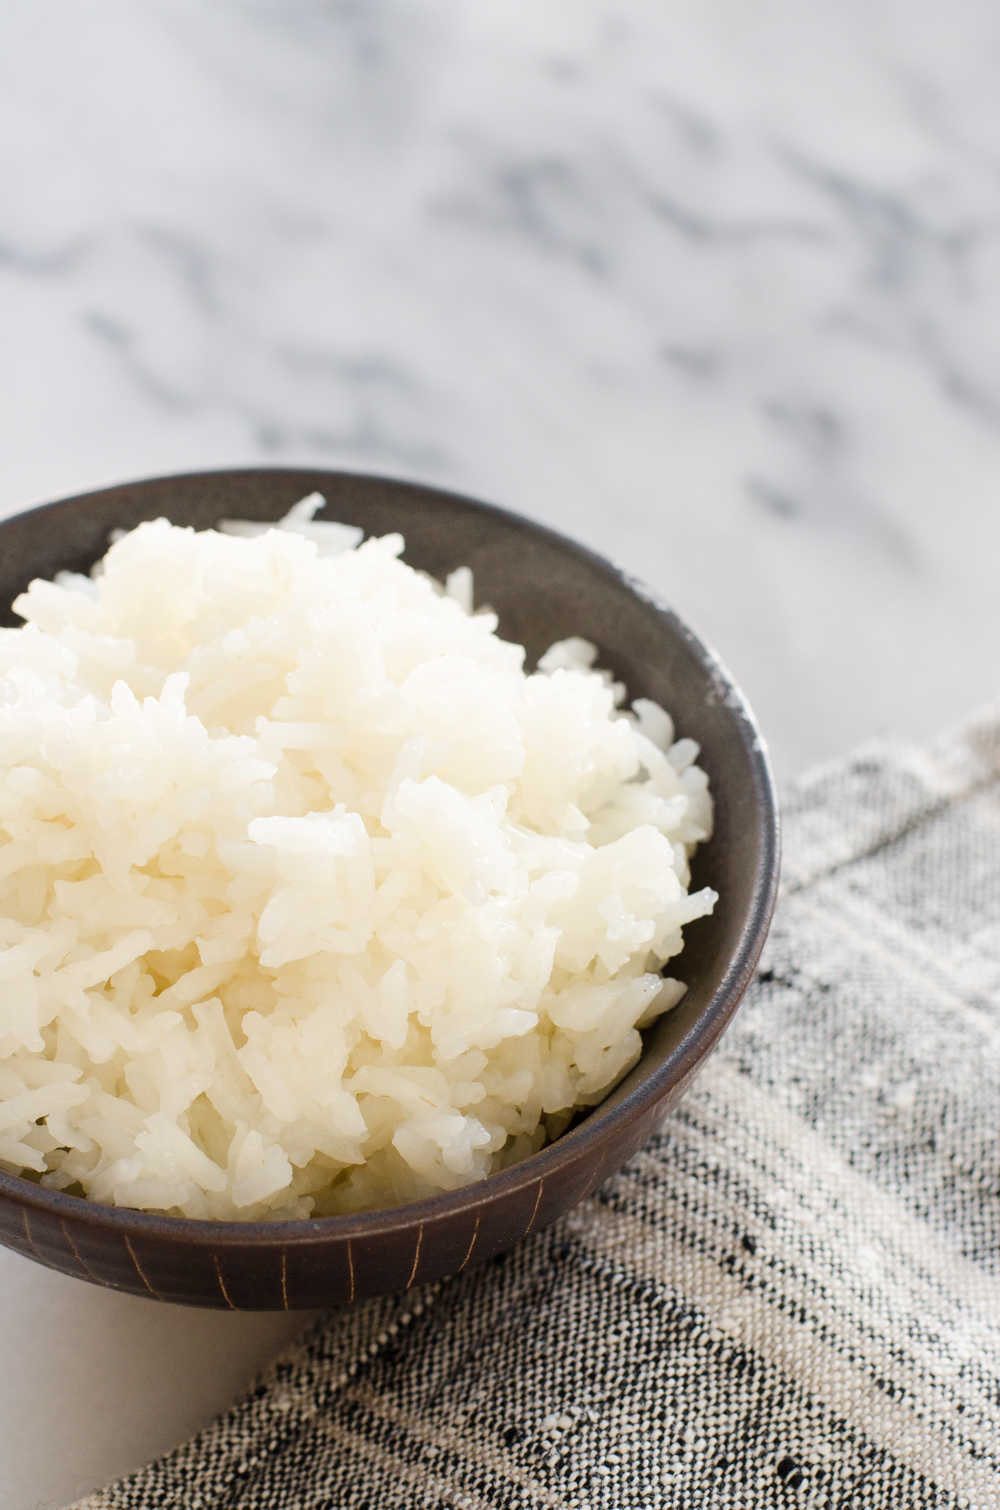 Why I Eat White Rice Instead of Brown Rice